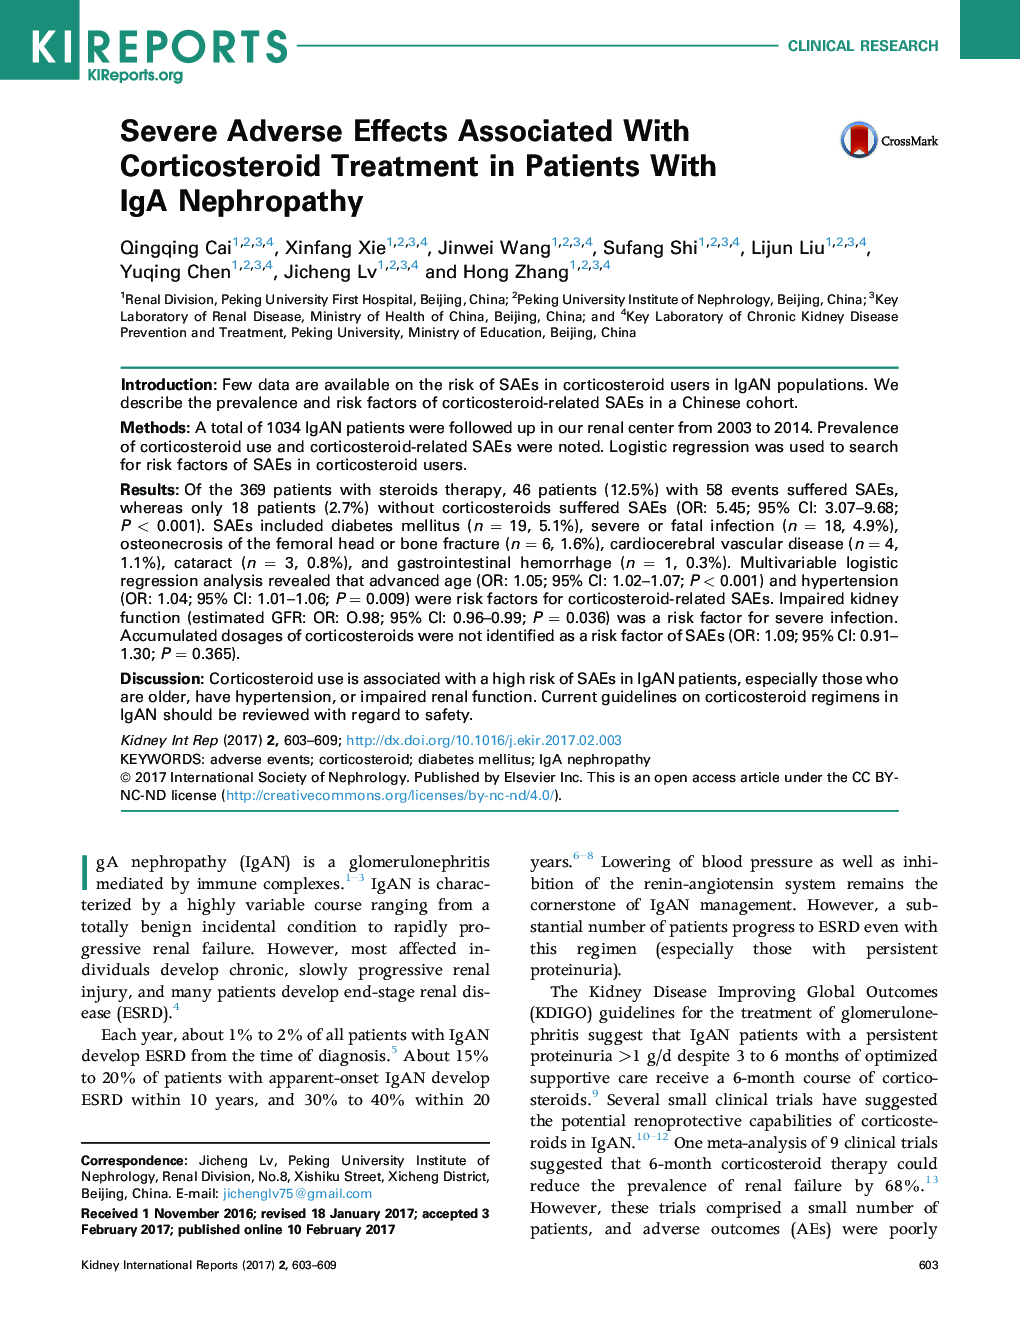 Severe Adverse Effects Associated With Corticosteroid Treatment in Patients With IgA Nephropathy